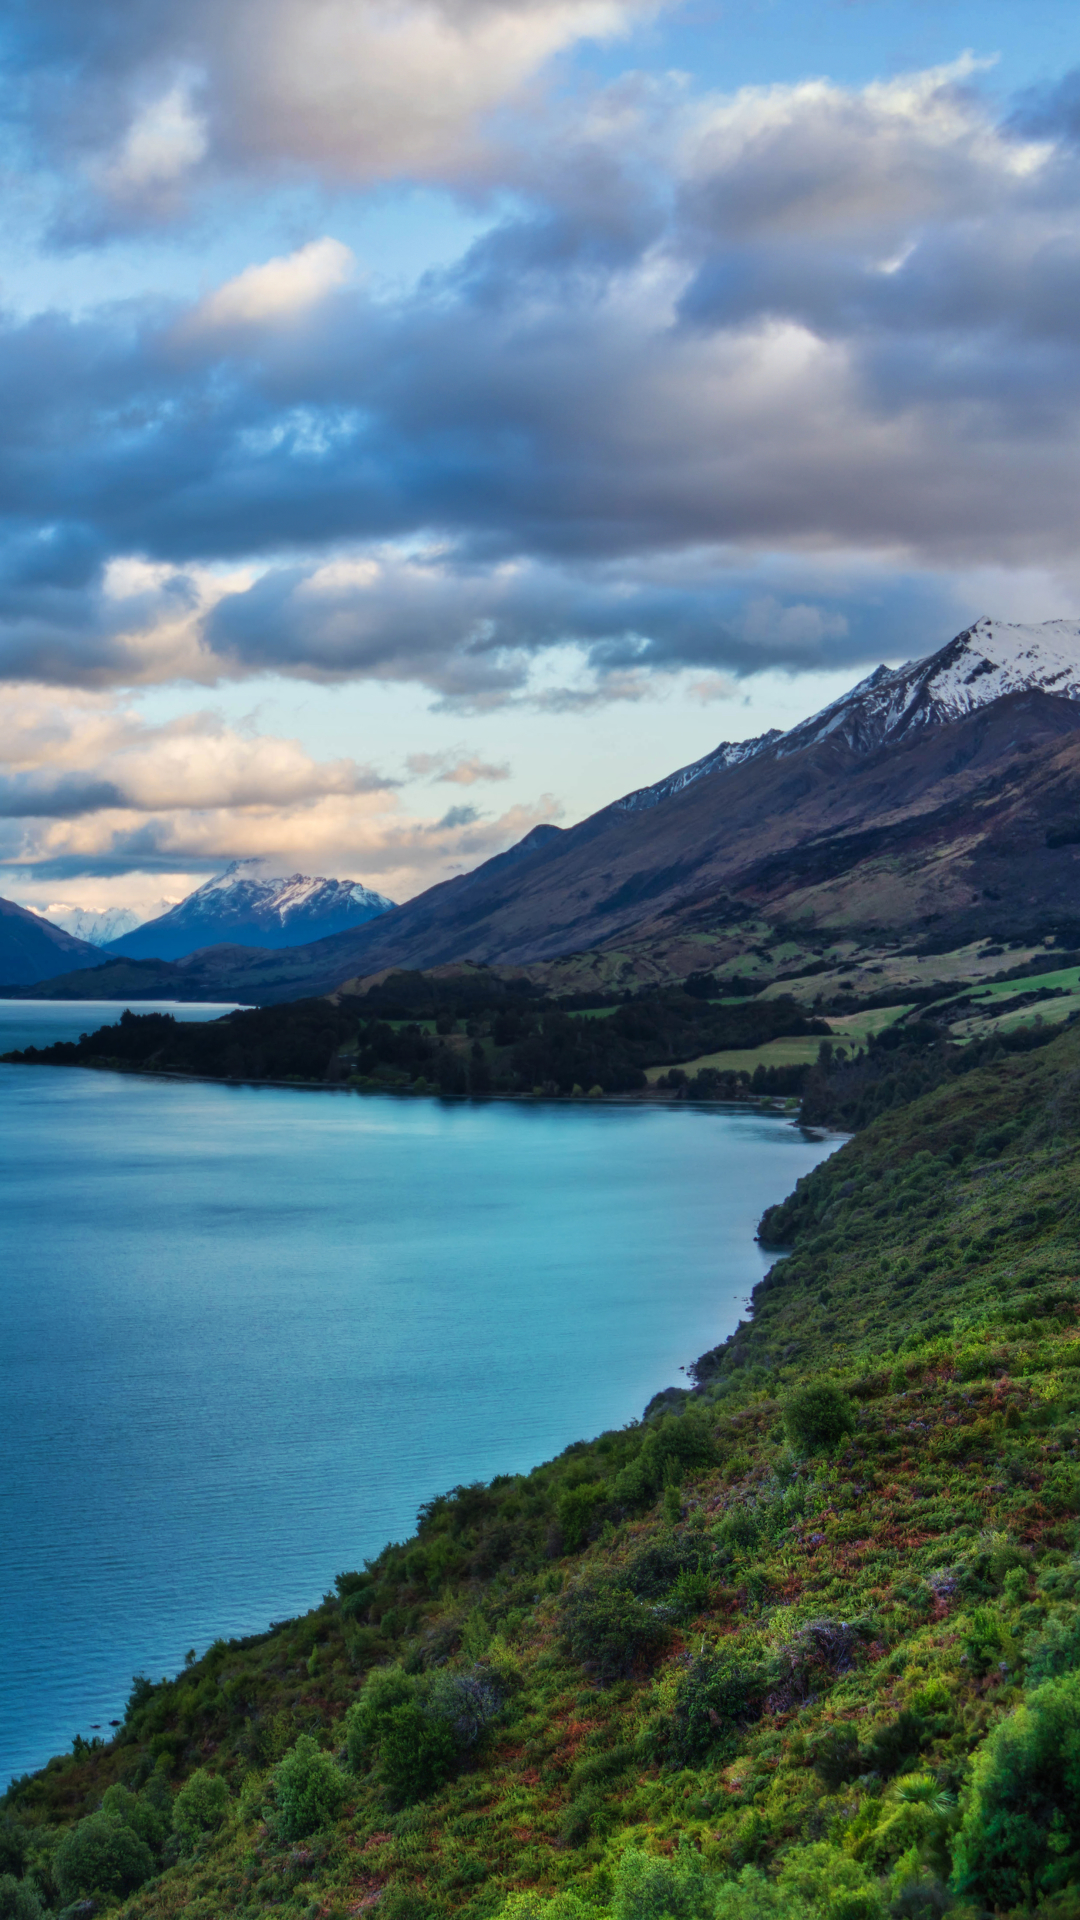 south island (new zealand), new zealand, earth, landscape, southern alps, mount creighton, lake